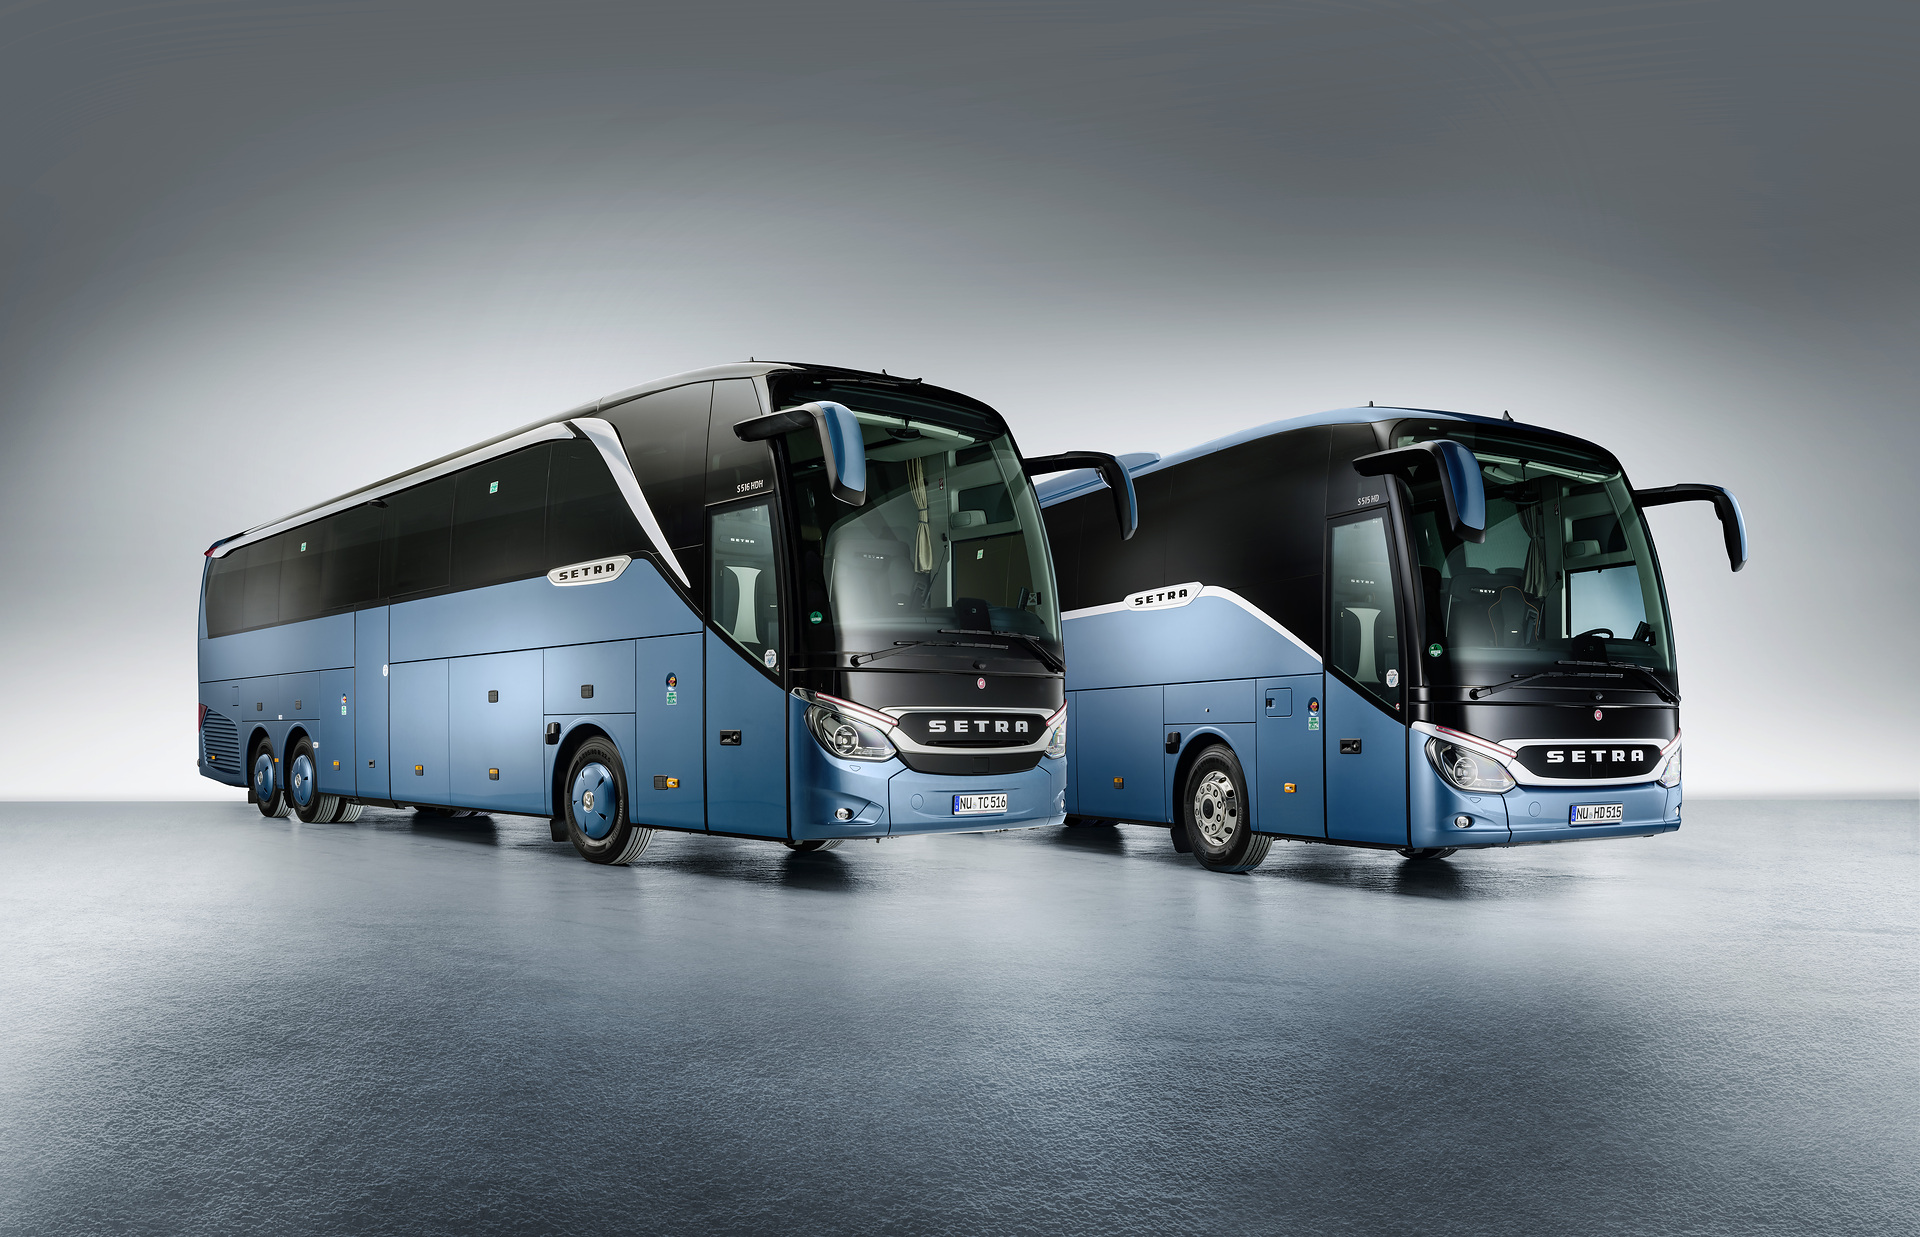 Face in the crowd: Next generation of Setra ComfortClass and TopClass coaches